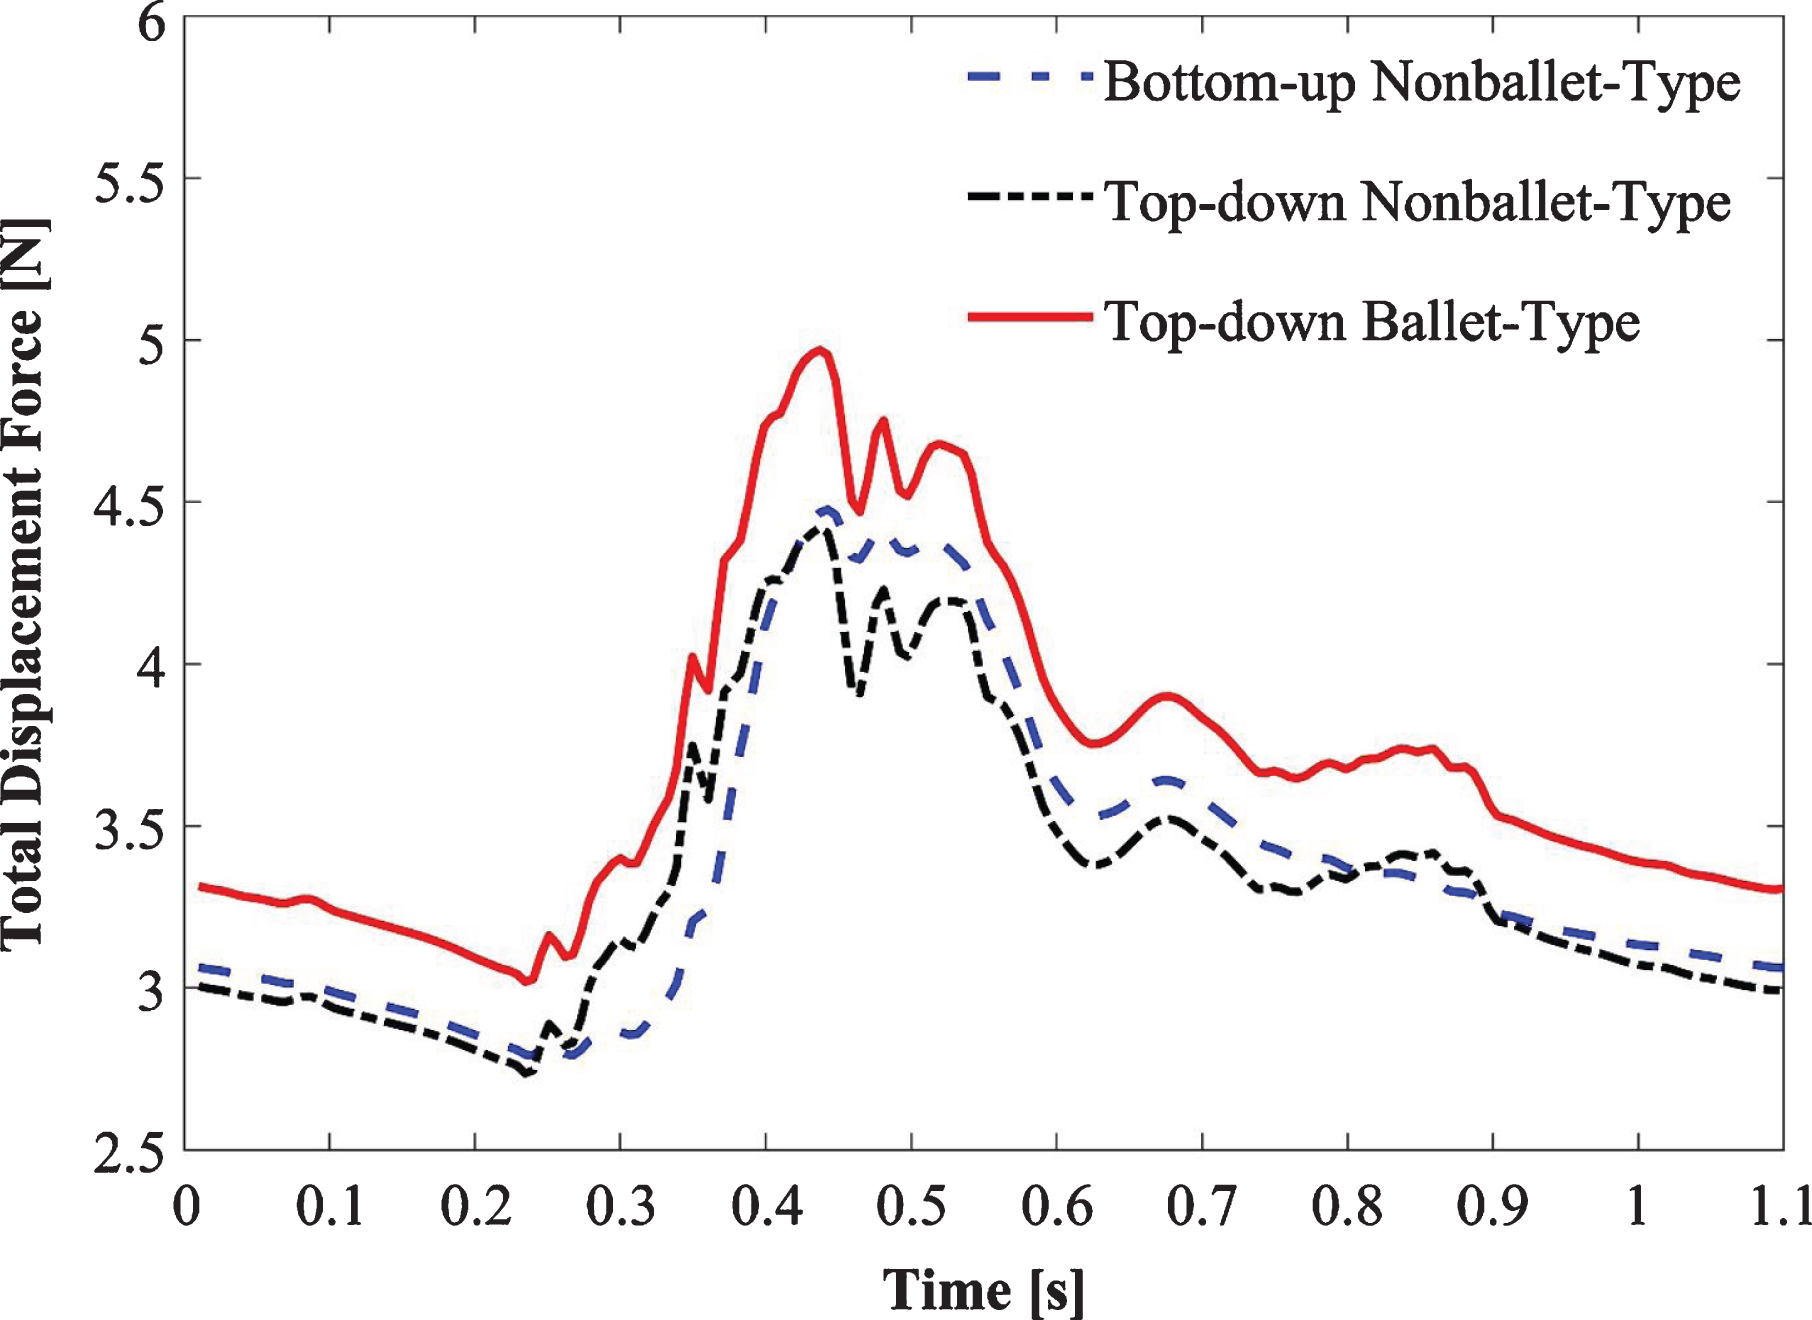 Variation of total displacement forces over time for bottom-up nonballet-type model, top-down nonballet-type model and top-down ballet-type model.